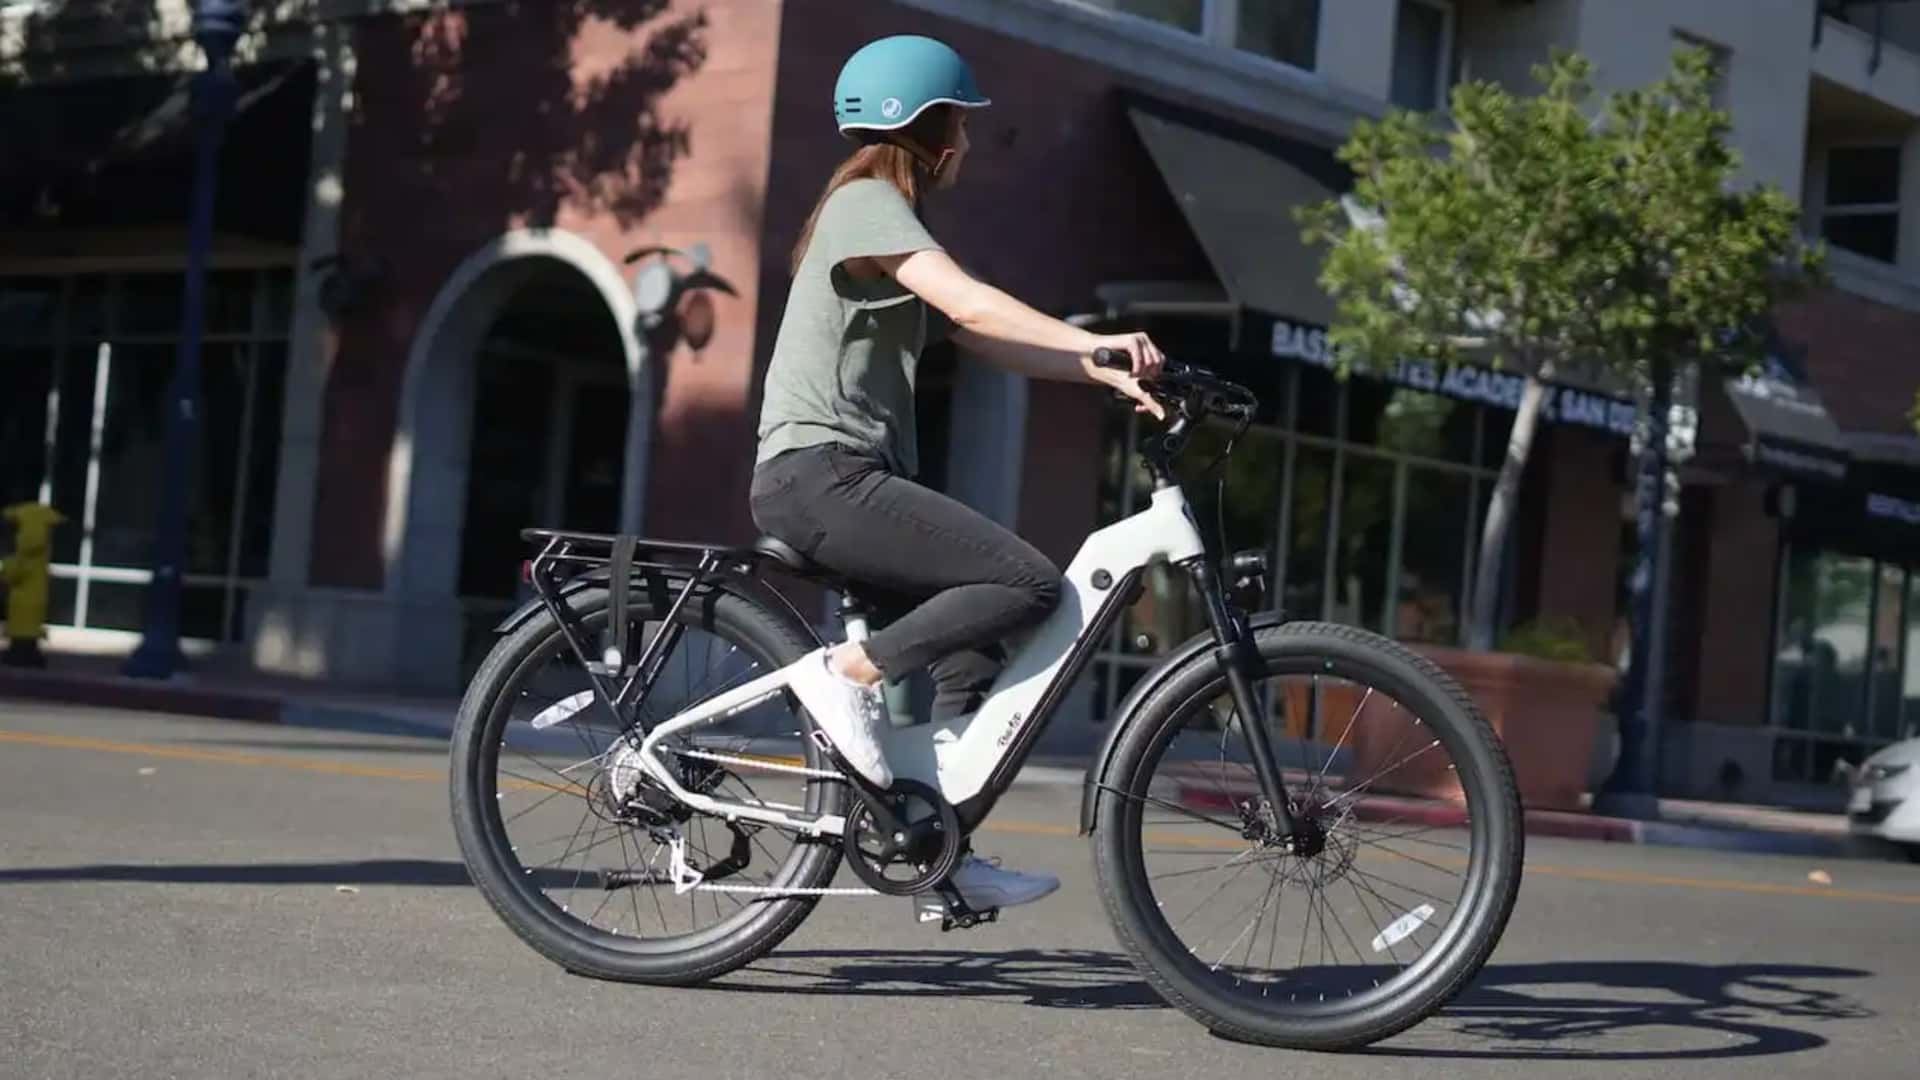 ride1up refreshes popular 700 series e-bike with tech updates